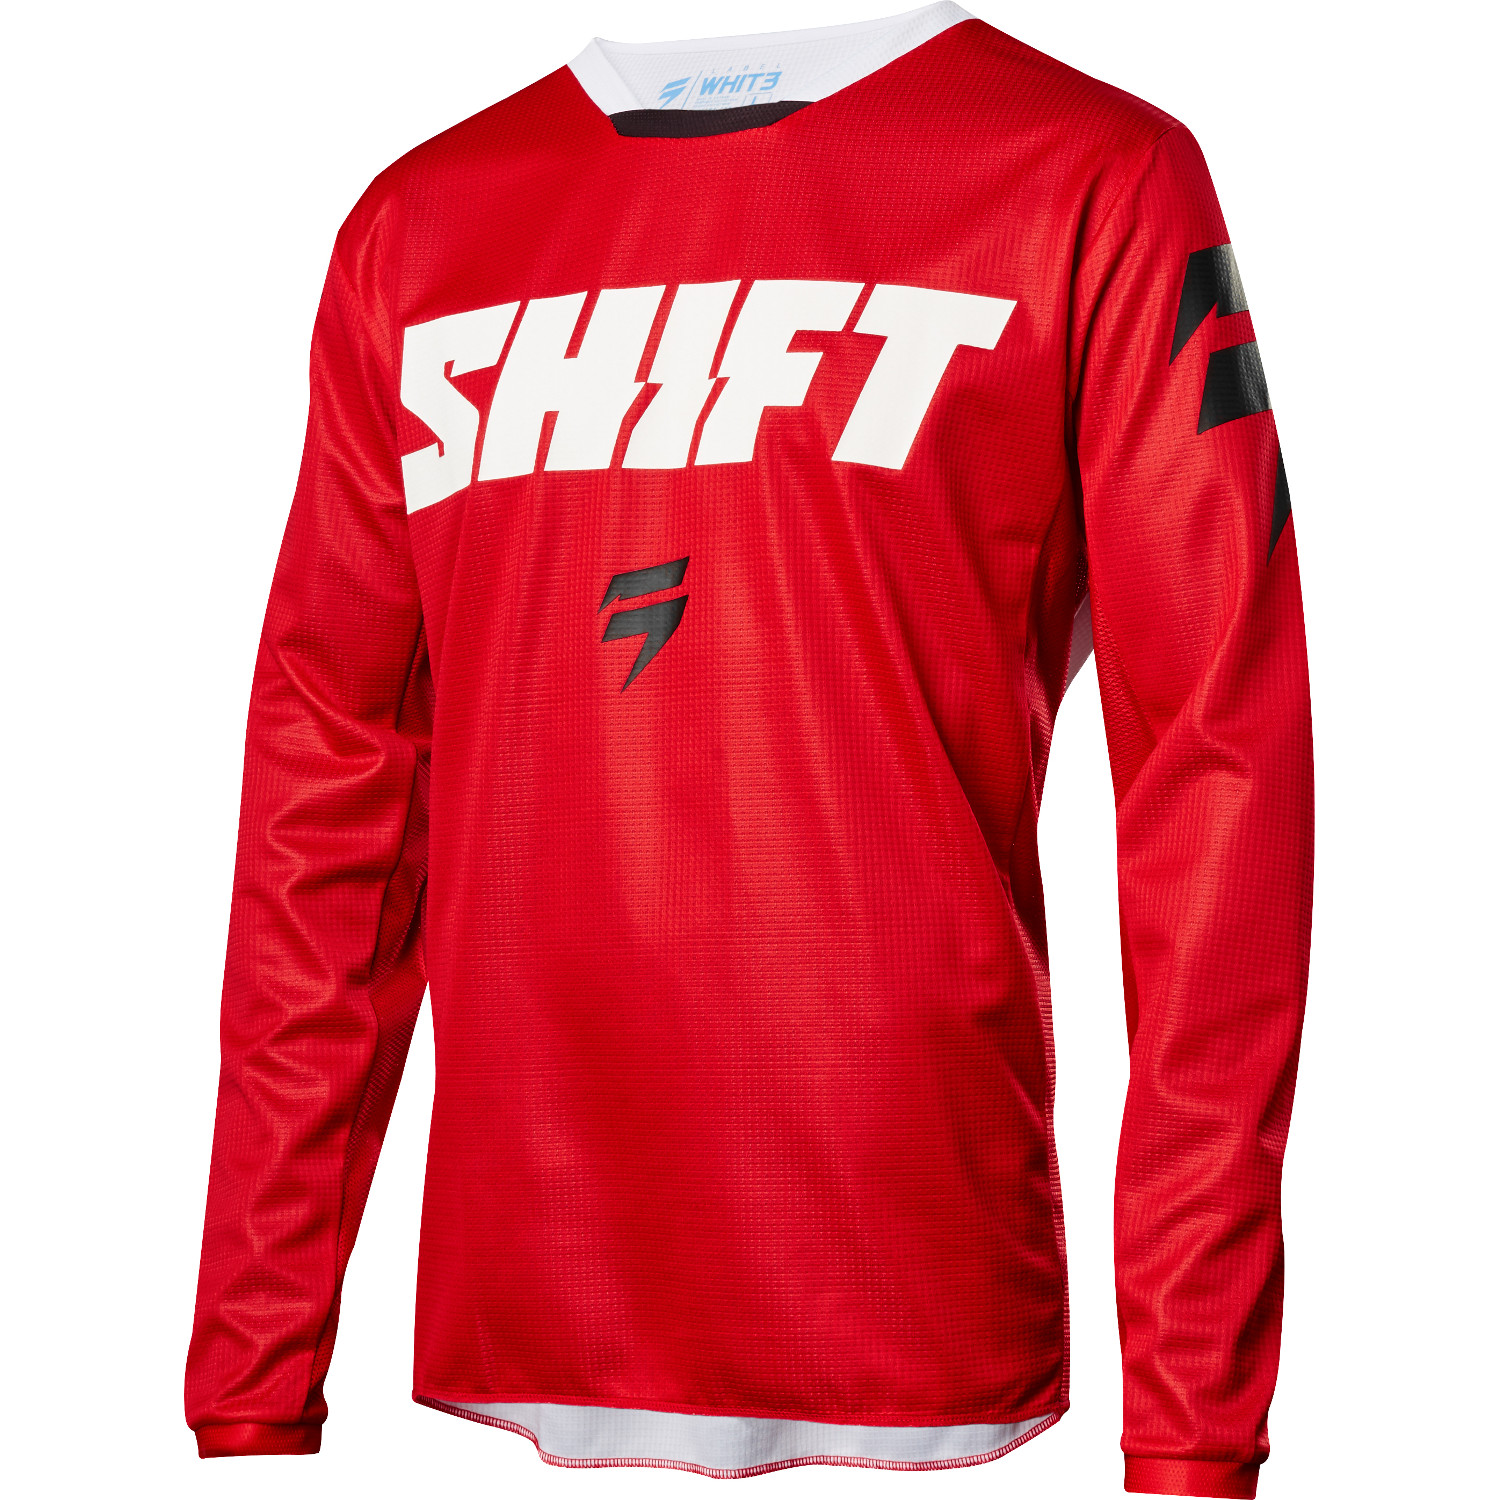 Shift Maillot MX Whit3 Label Ninety Seven - Red